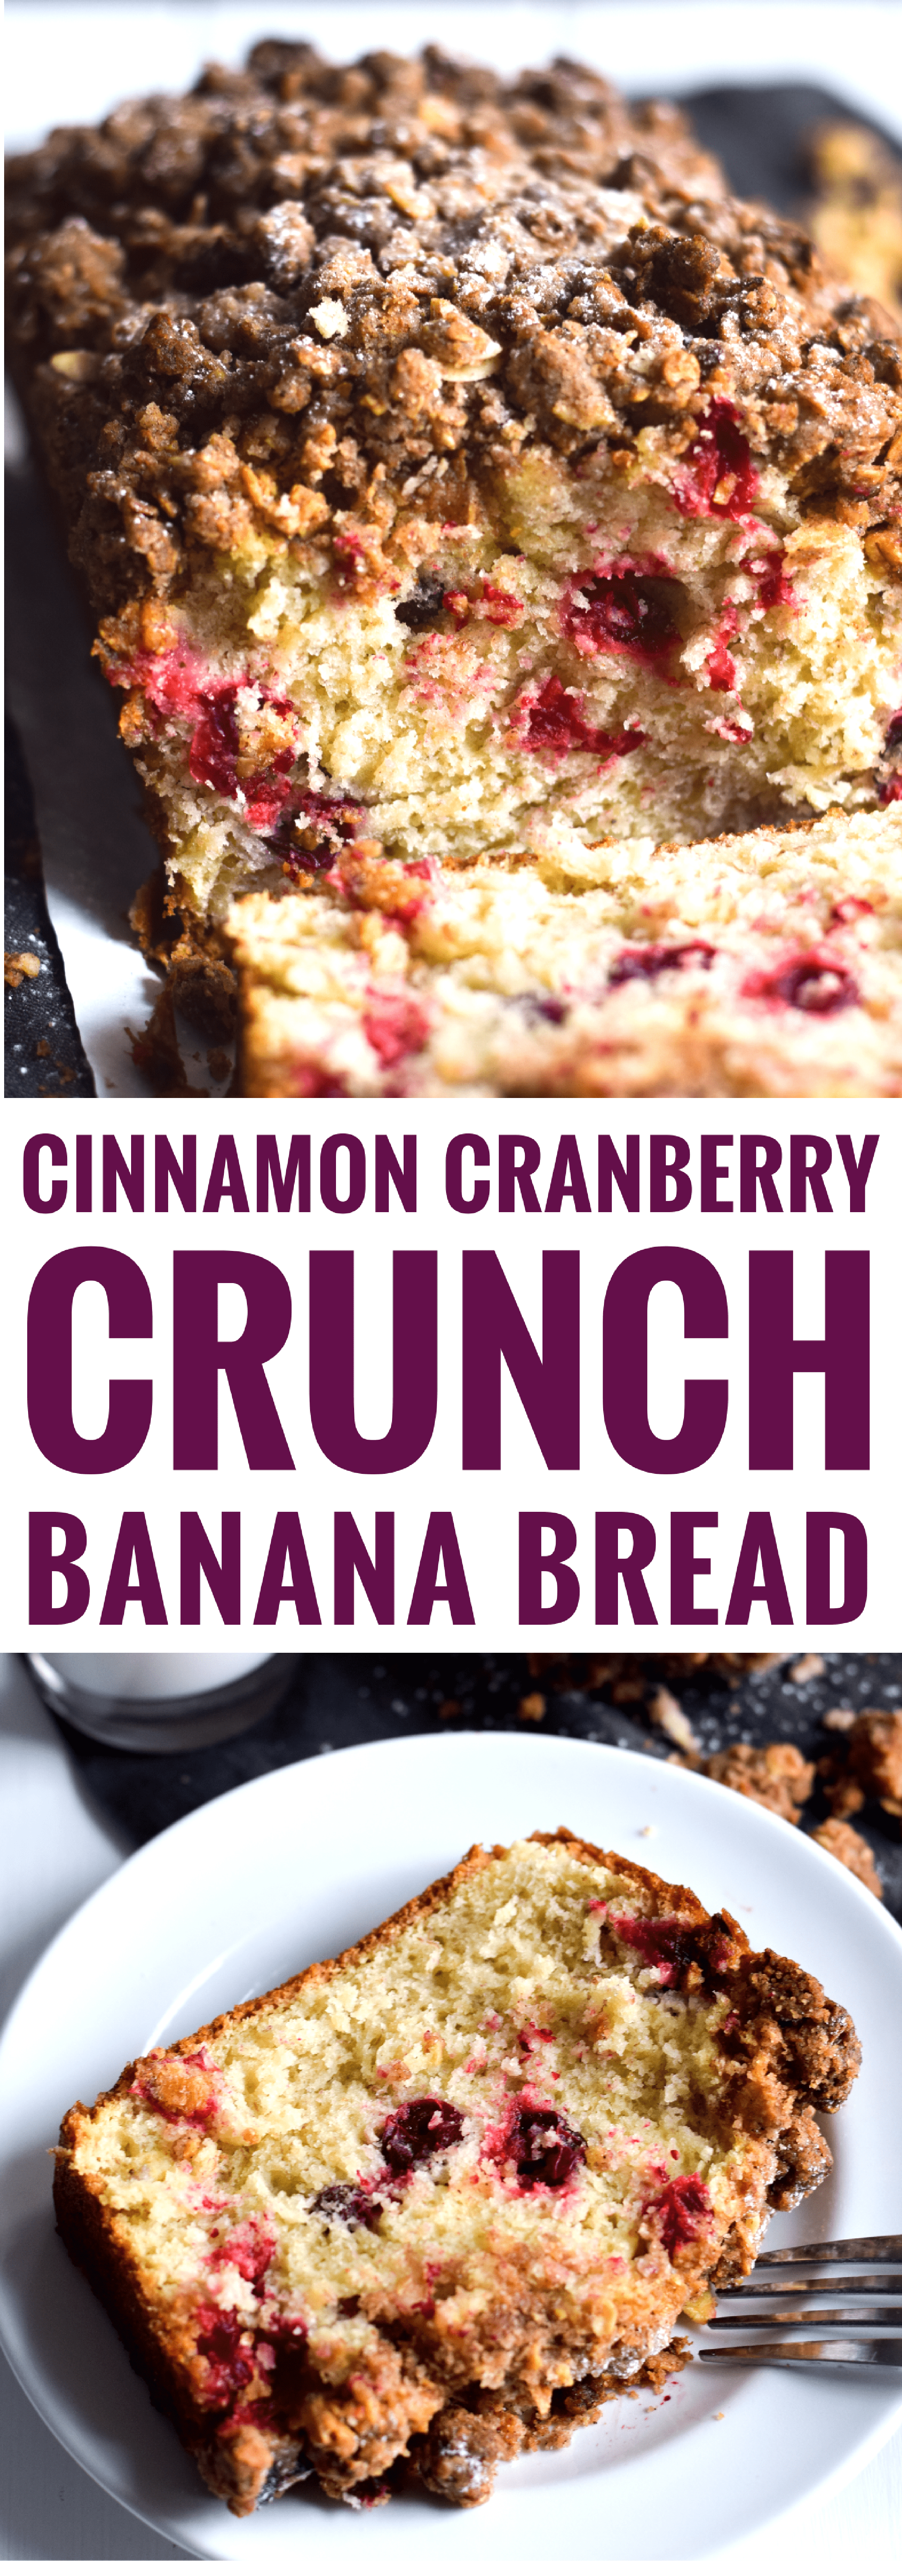 This cranberry banana bread topped with a cinnamon granola crunch is super moist, fluffy and filled with cranberries. Perfect for the holidays!